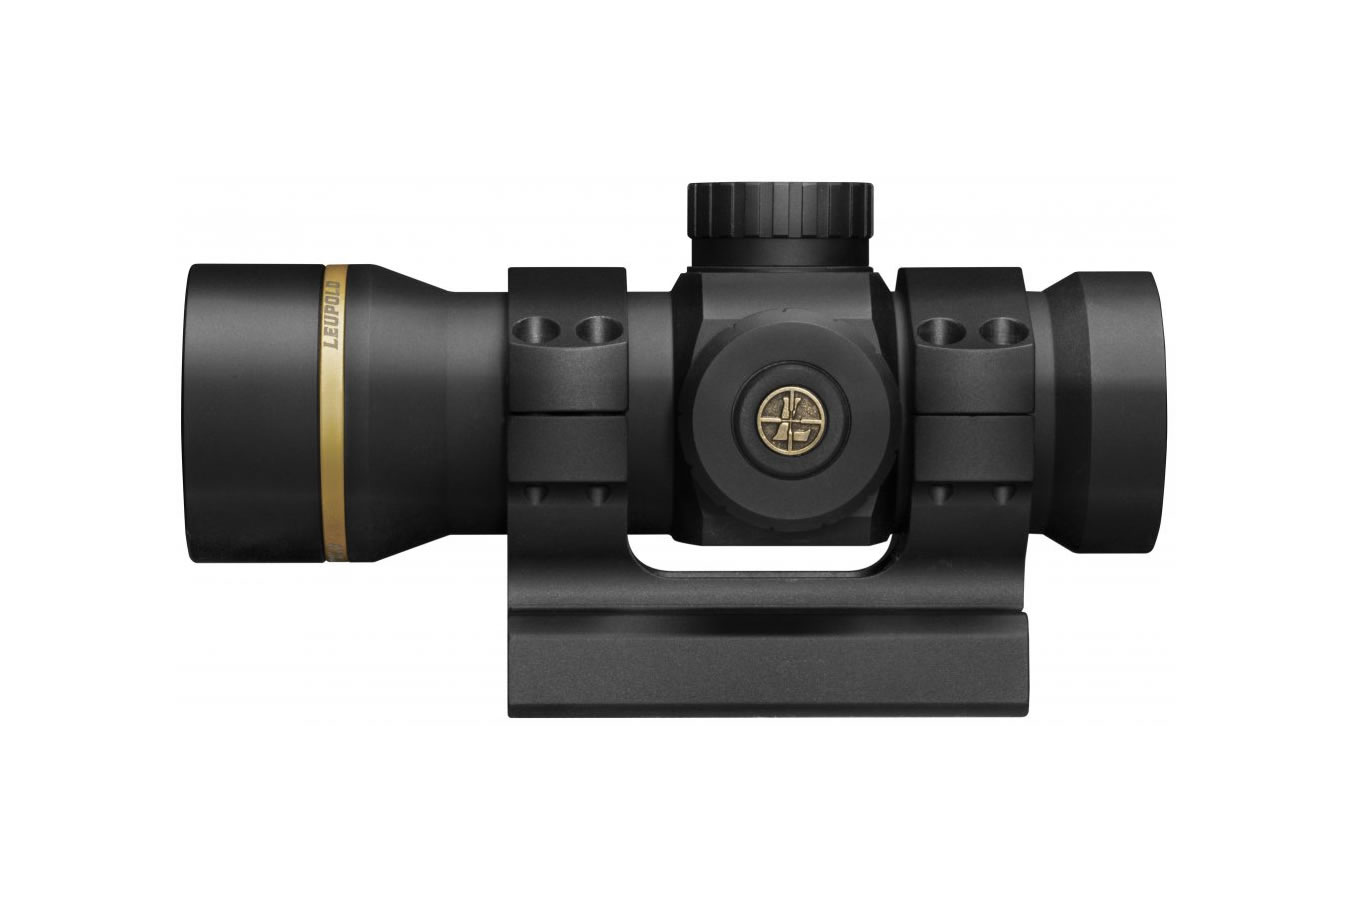 leupold-freedom-rds-1x34mm-34mm-1moa-red-dot-sight-sportsman-s